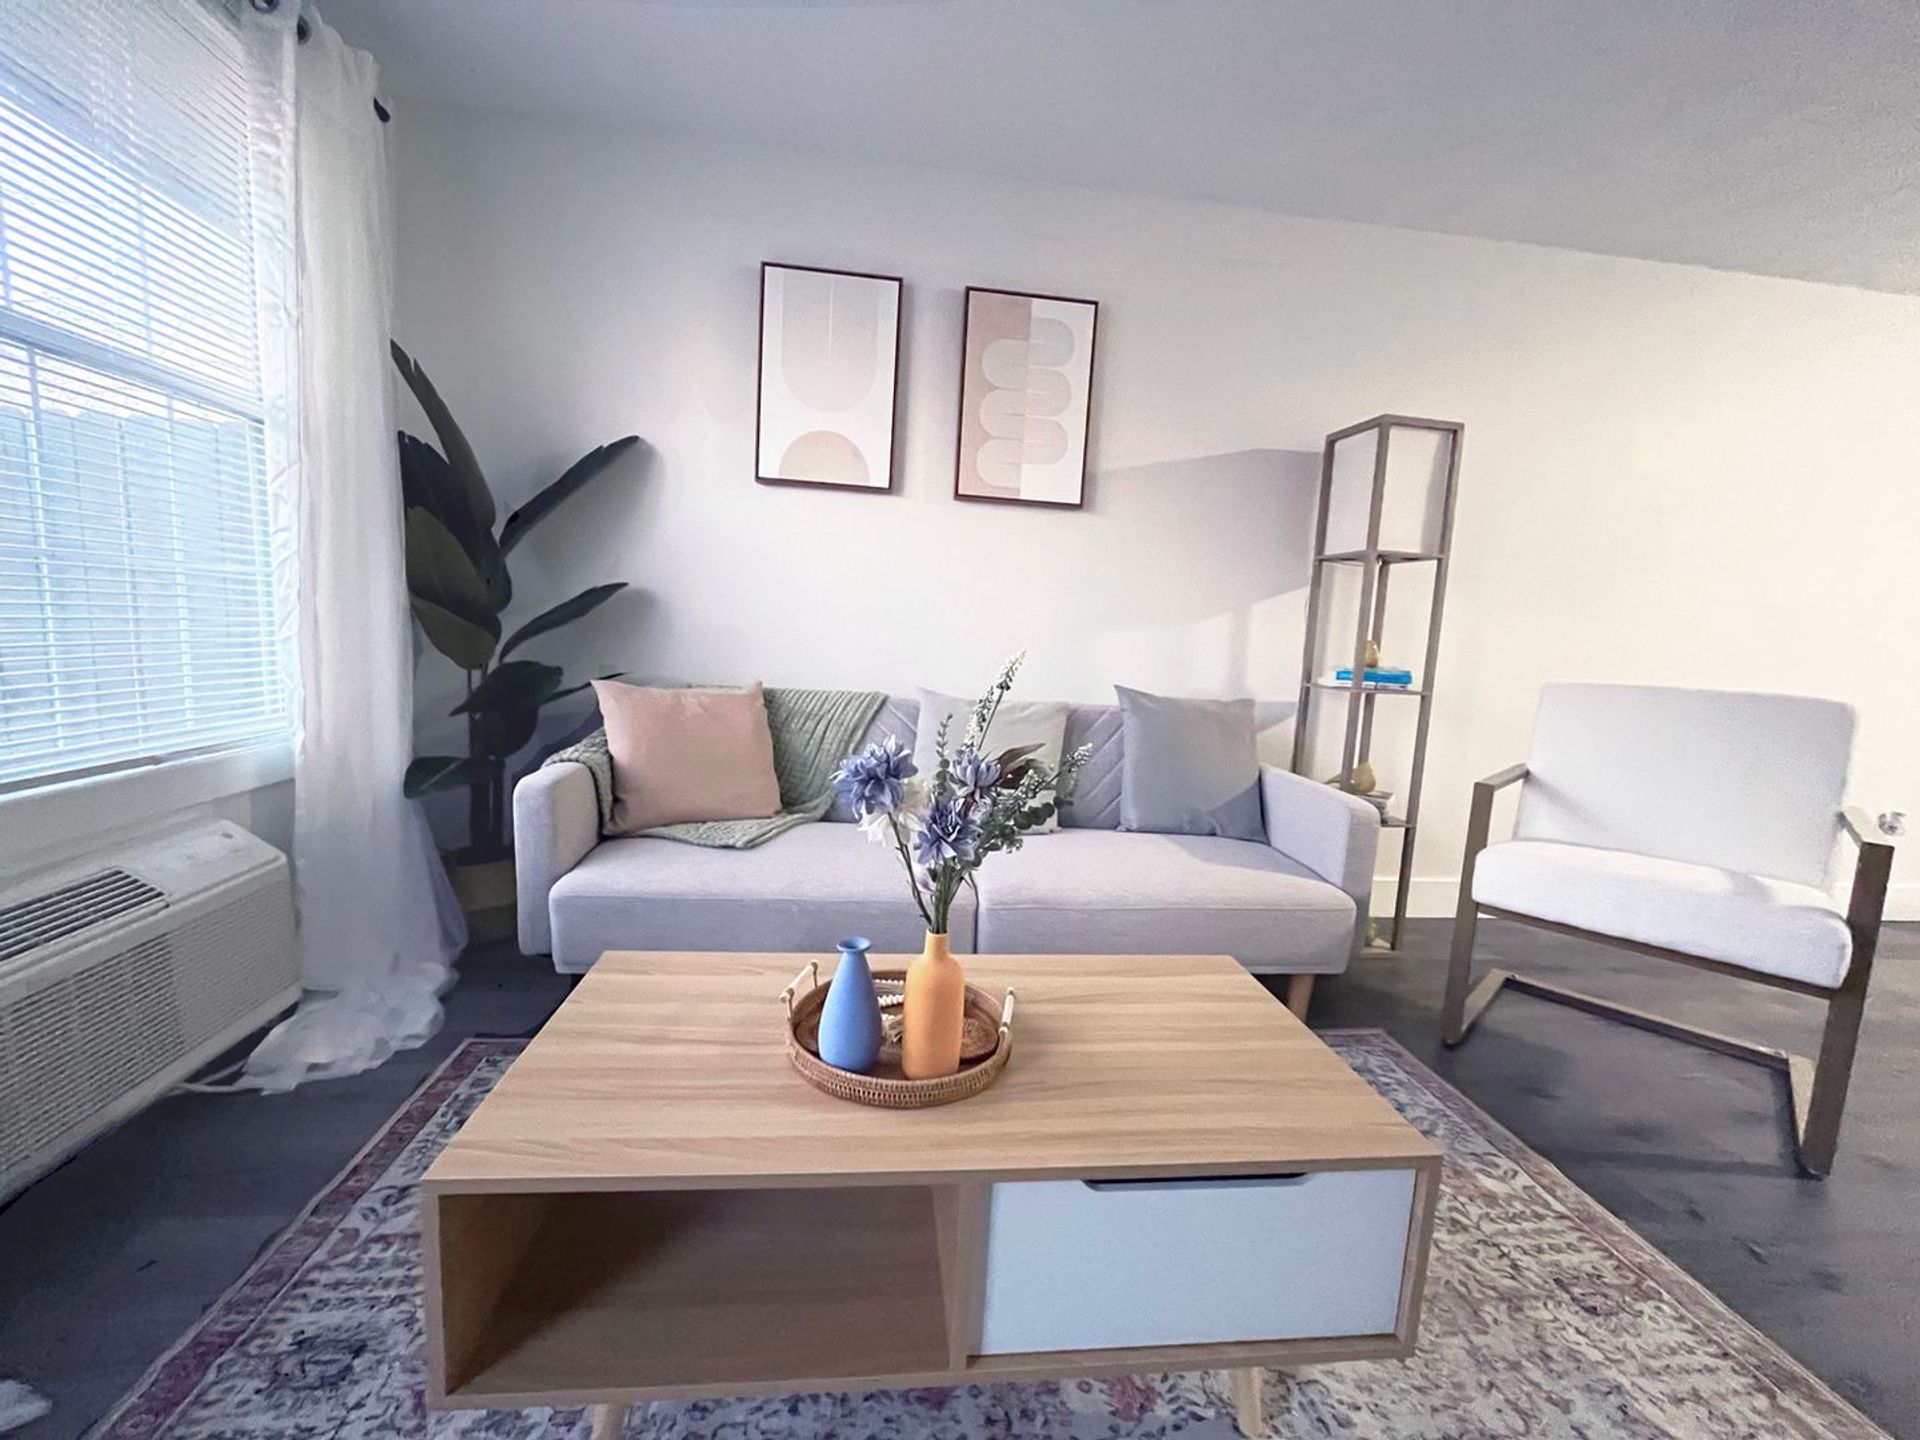 1 Bed and 1 Bath Apartments for Rent | Entirely Renovated Image